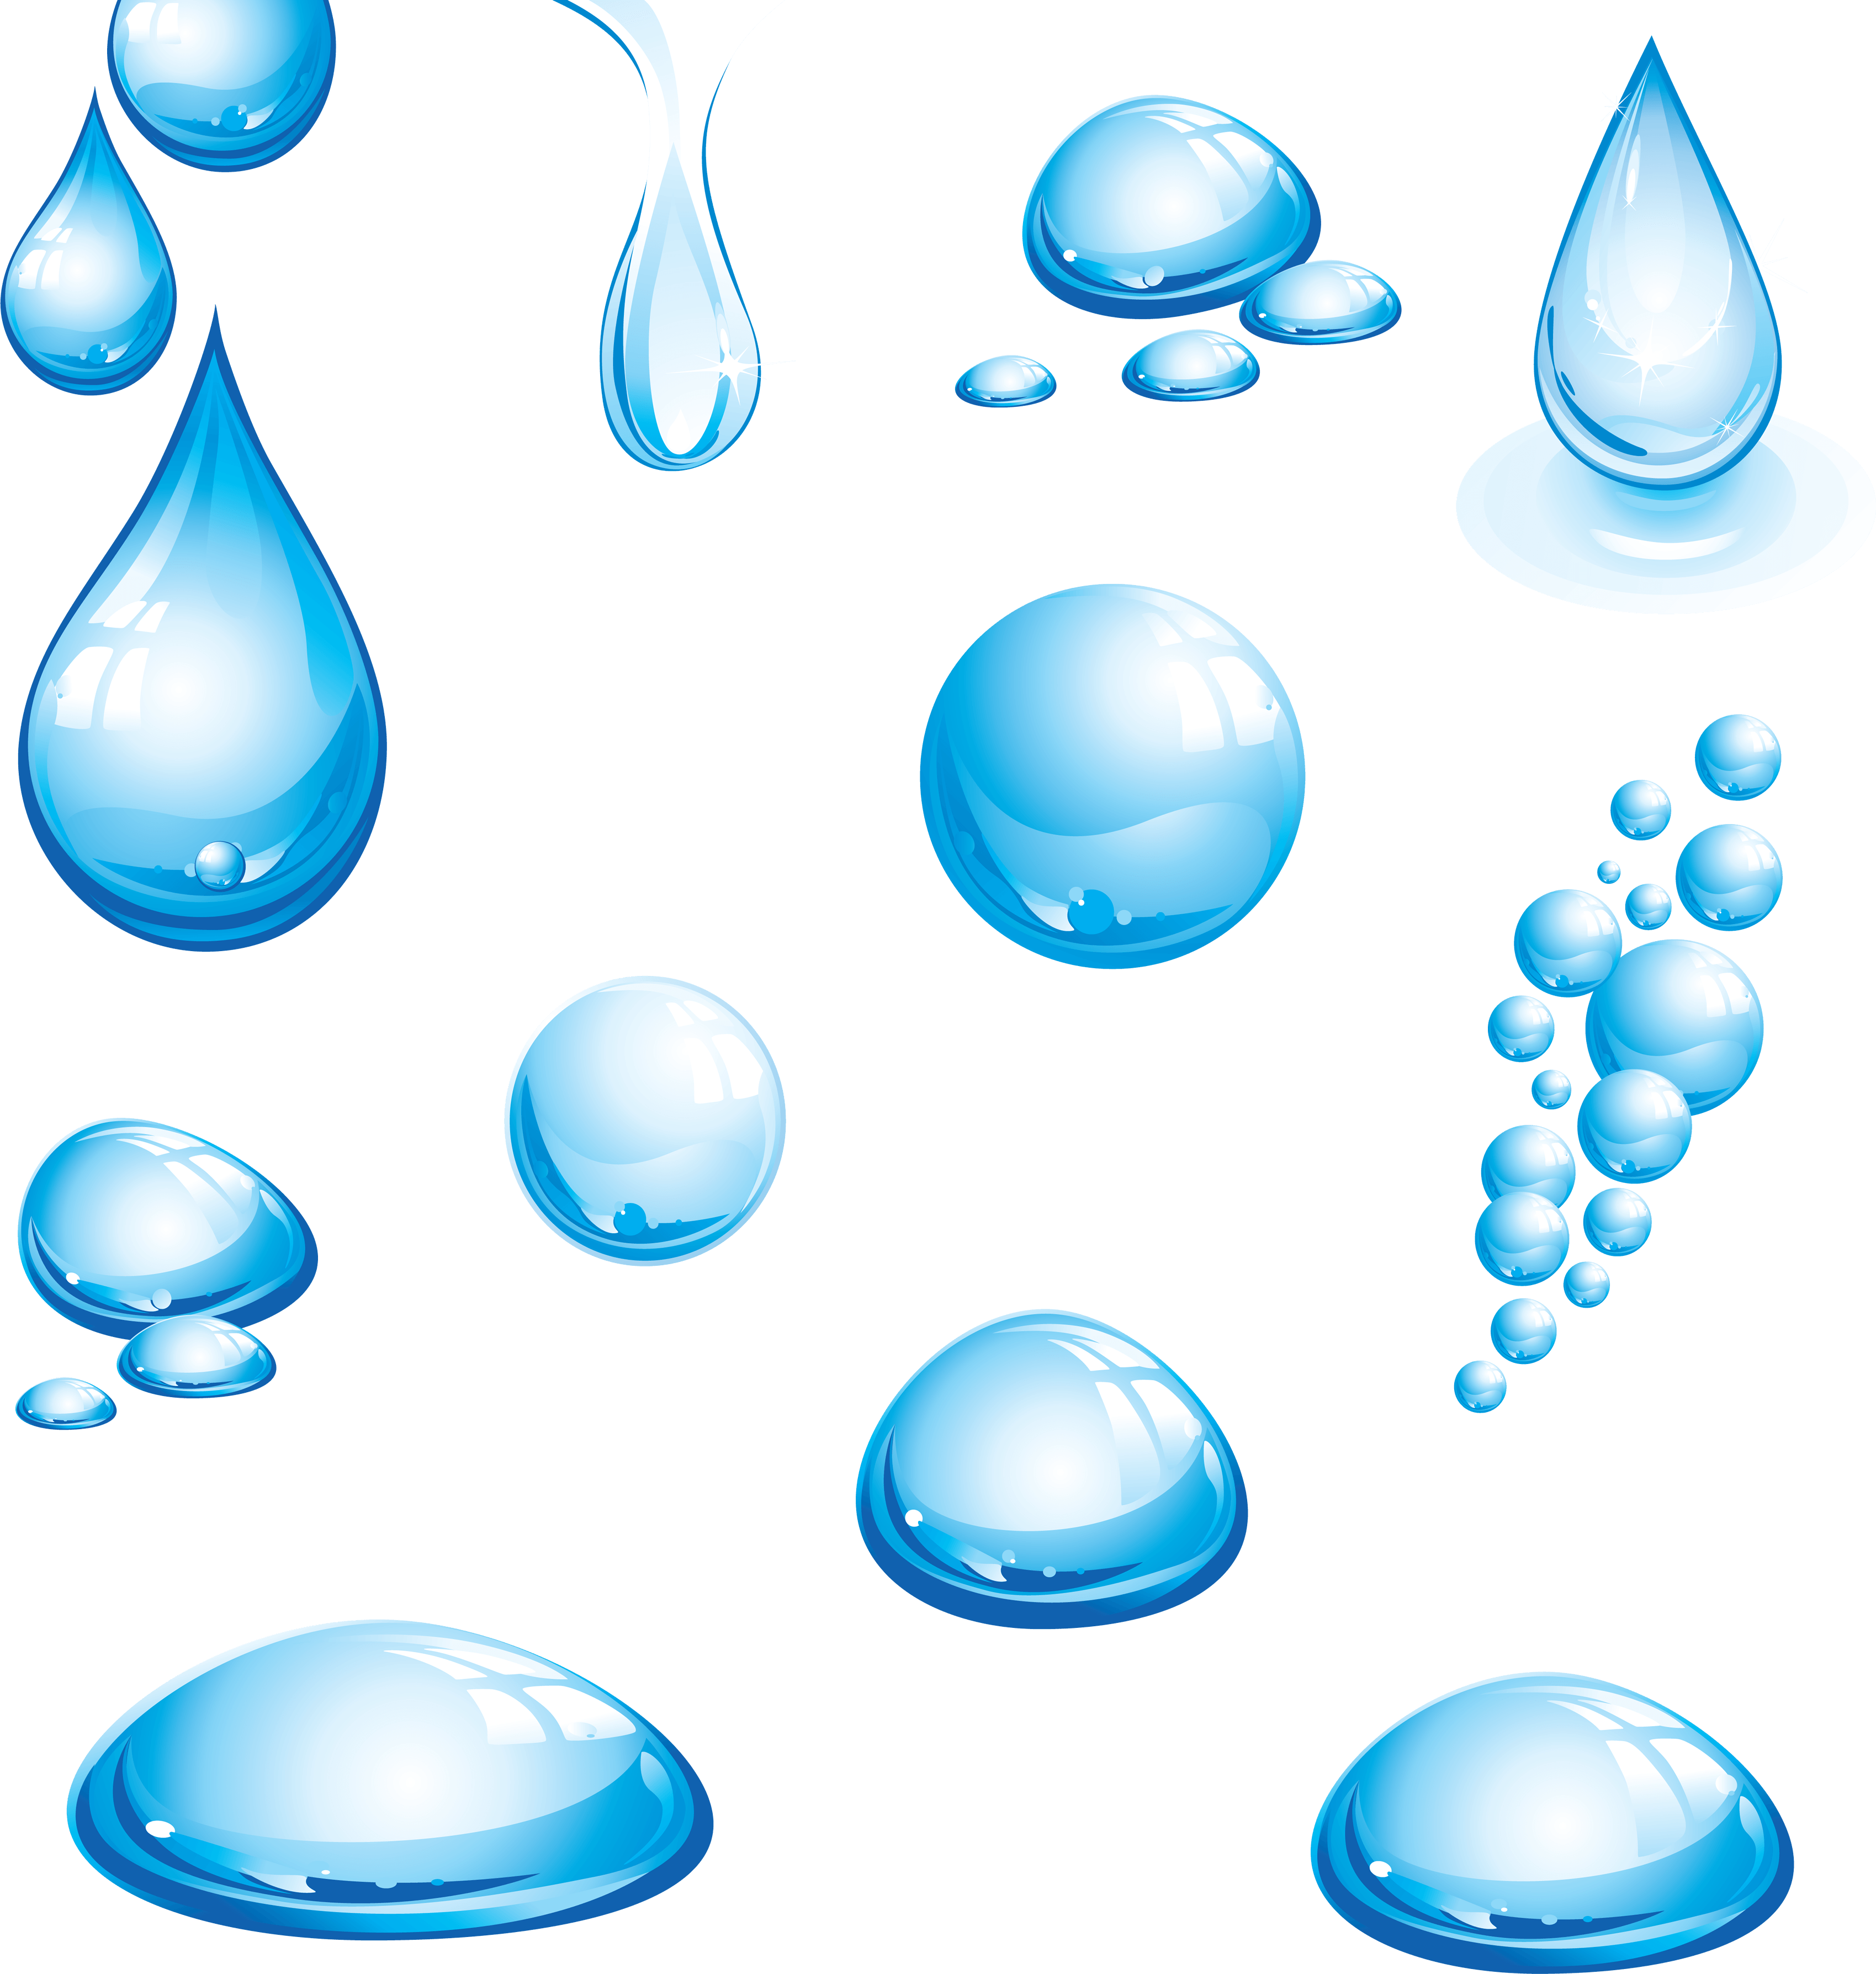 Water Droplets clipart colorful raindrop - Pencil and in color water ...